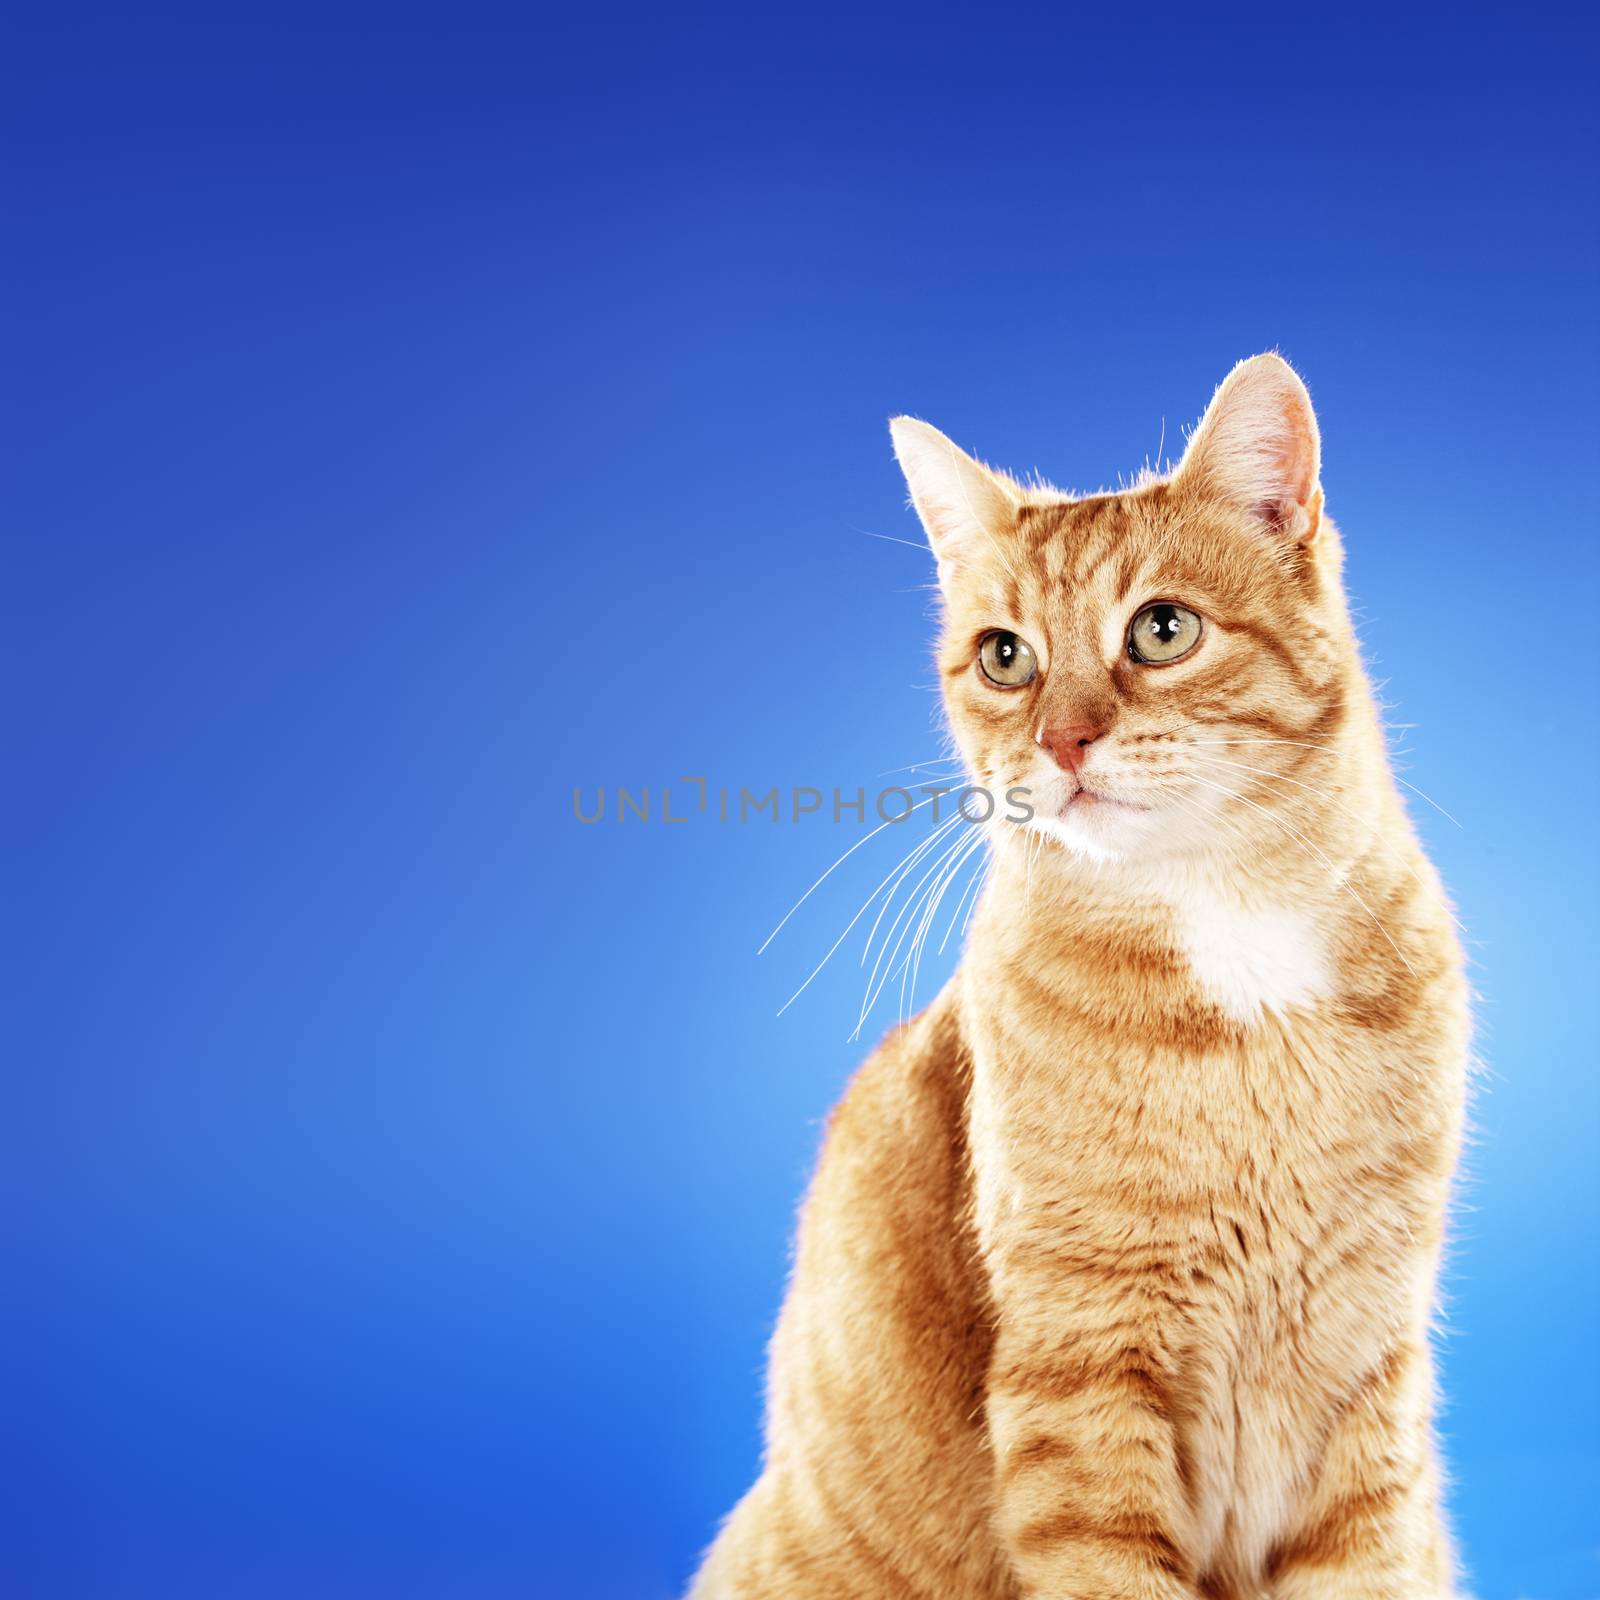 Senior (10 years) domestic ginger cat sitting in front of blue background. Copy space on the left side.